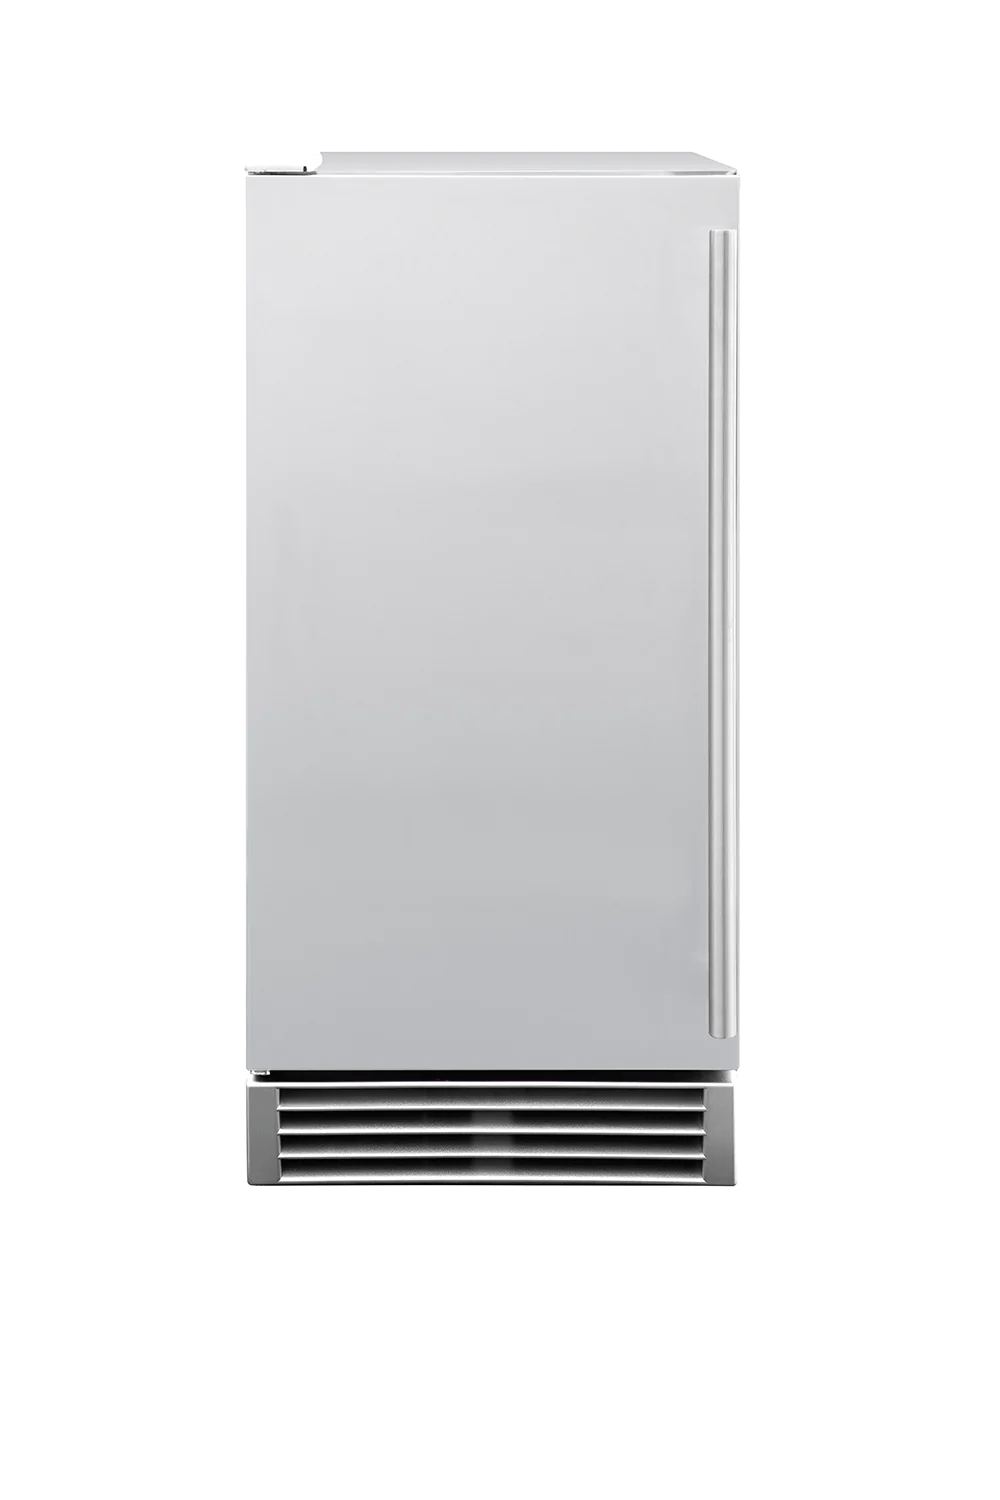 AMG Refrigeration + Cooling American Made Grills 15" UL Outdoor Rated Ice Maker w/Stainless Door - 50 lb. Capacity / SSIM-15